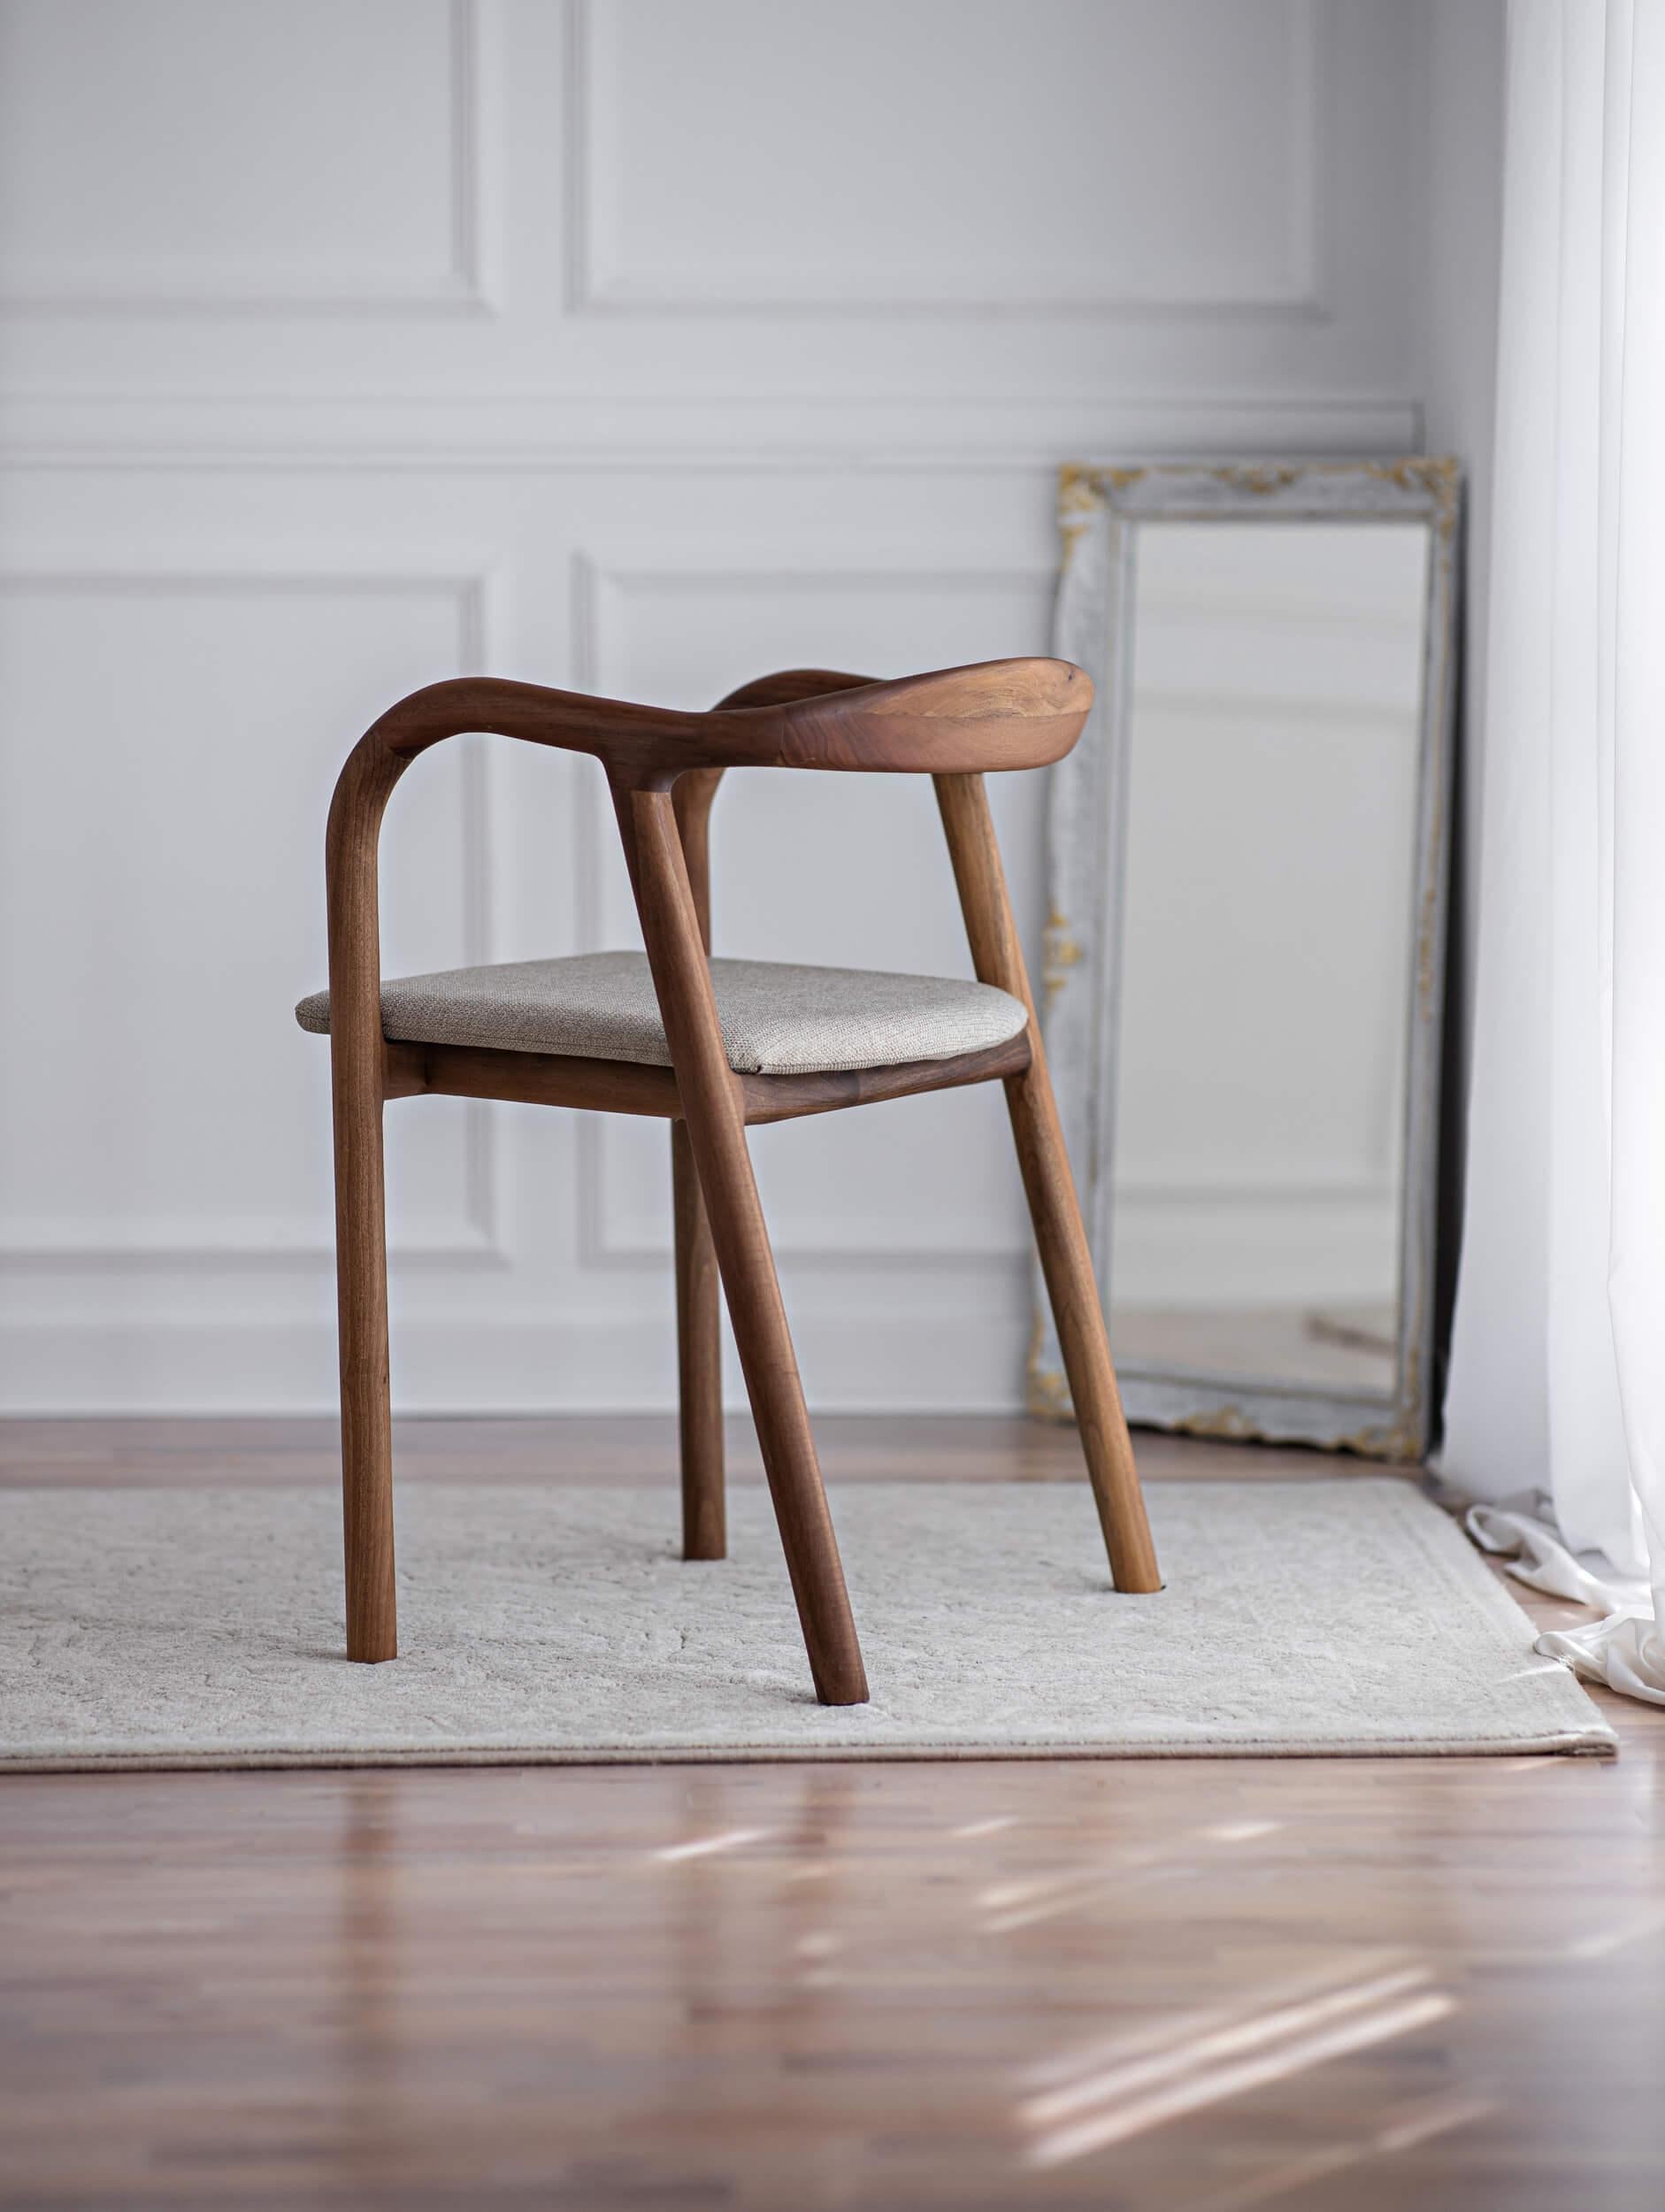 Mosso chair is a handmade chair made of solid, high-quality walnut wood.
For its production, we use only carefully selected wood pieces.

The chair was designed by a French architect Charlie Pommier in Paris (France).

Important note: As our chair